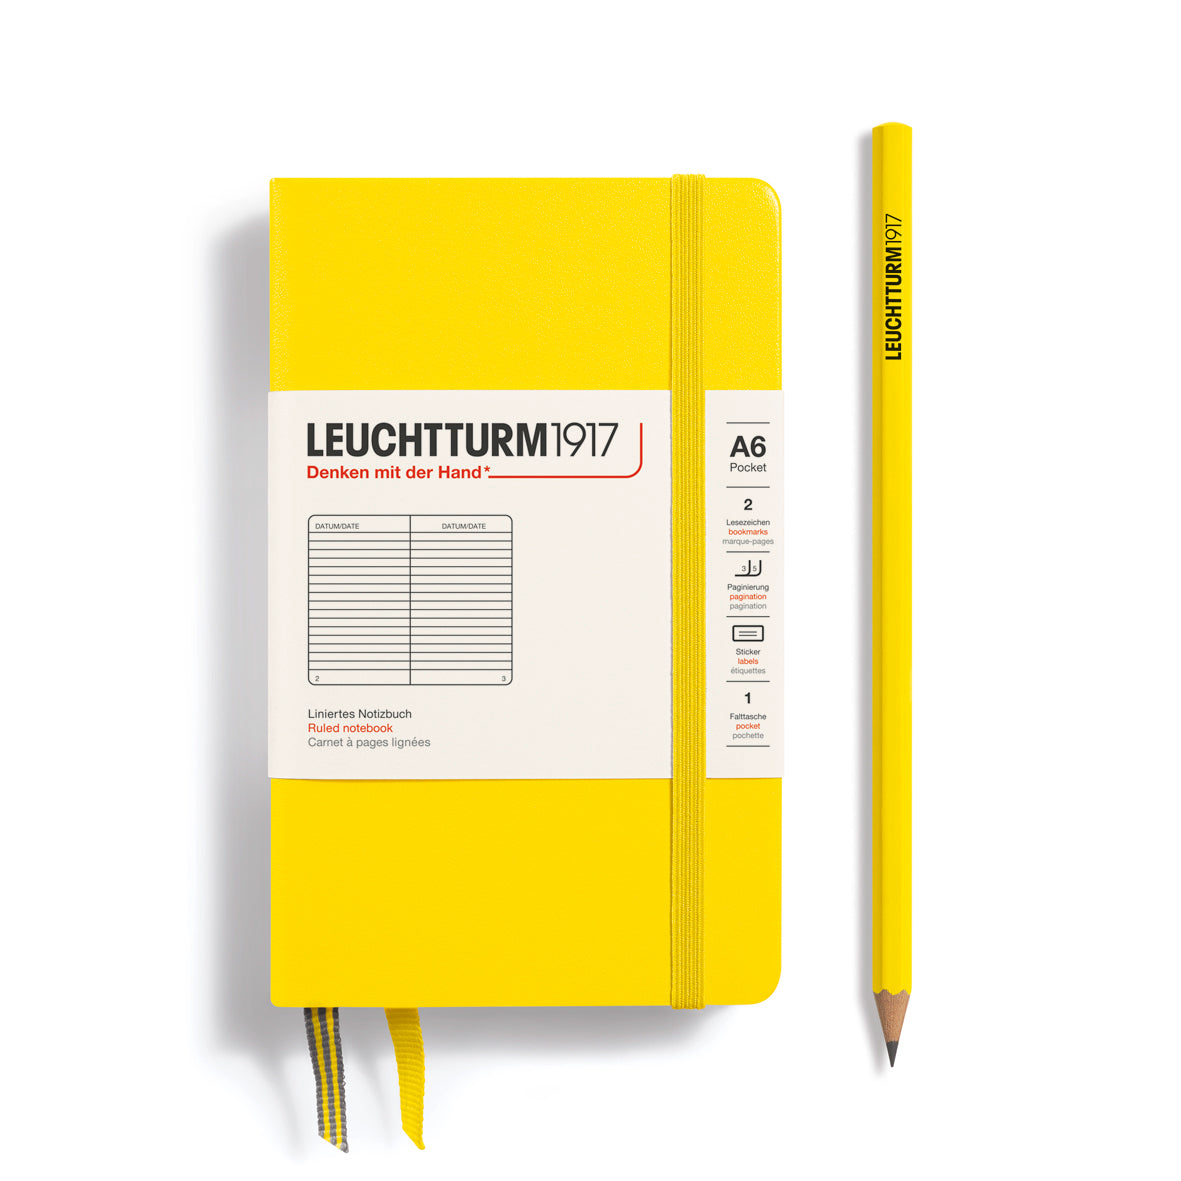 Leuchtturm Pocket Hardcover Notebook: Ruled Pages